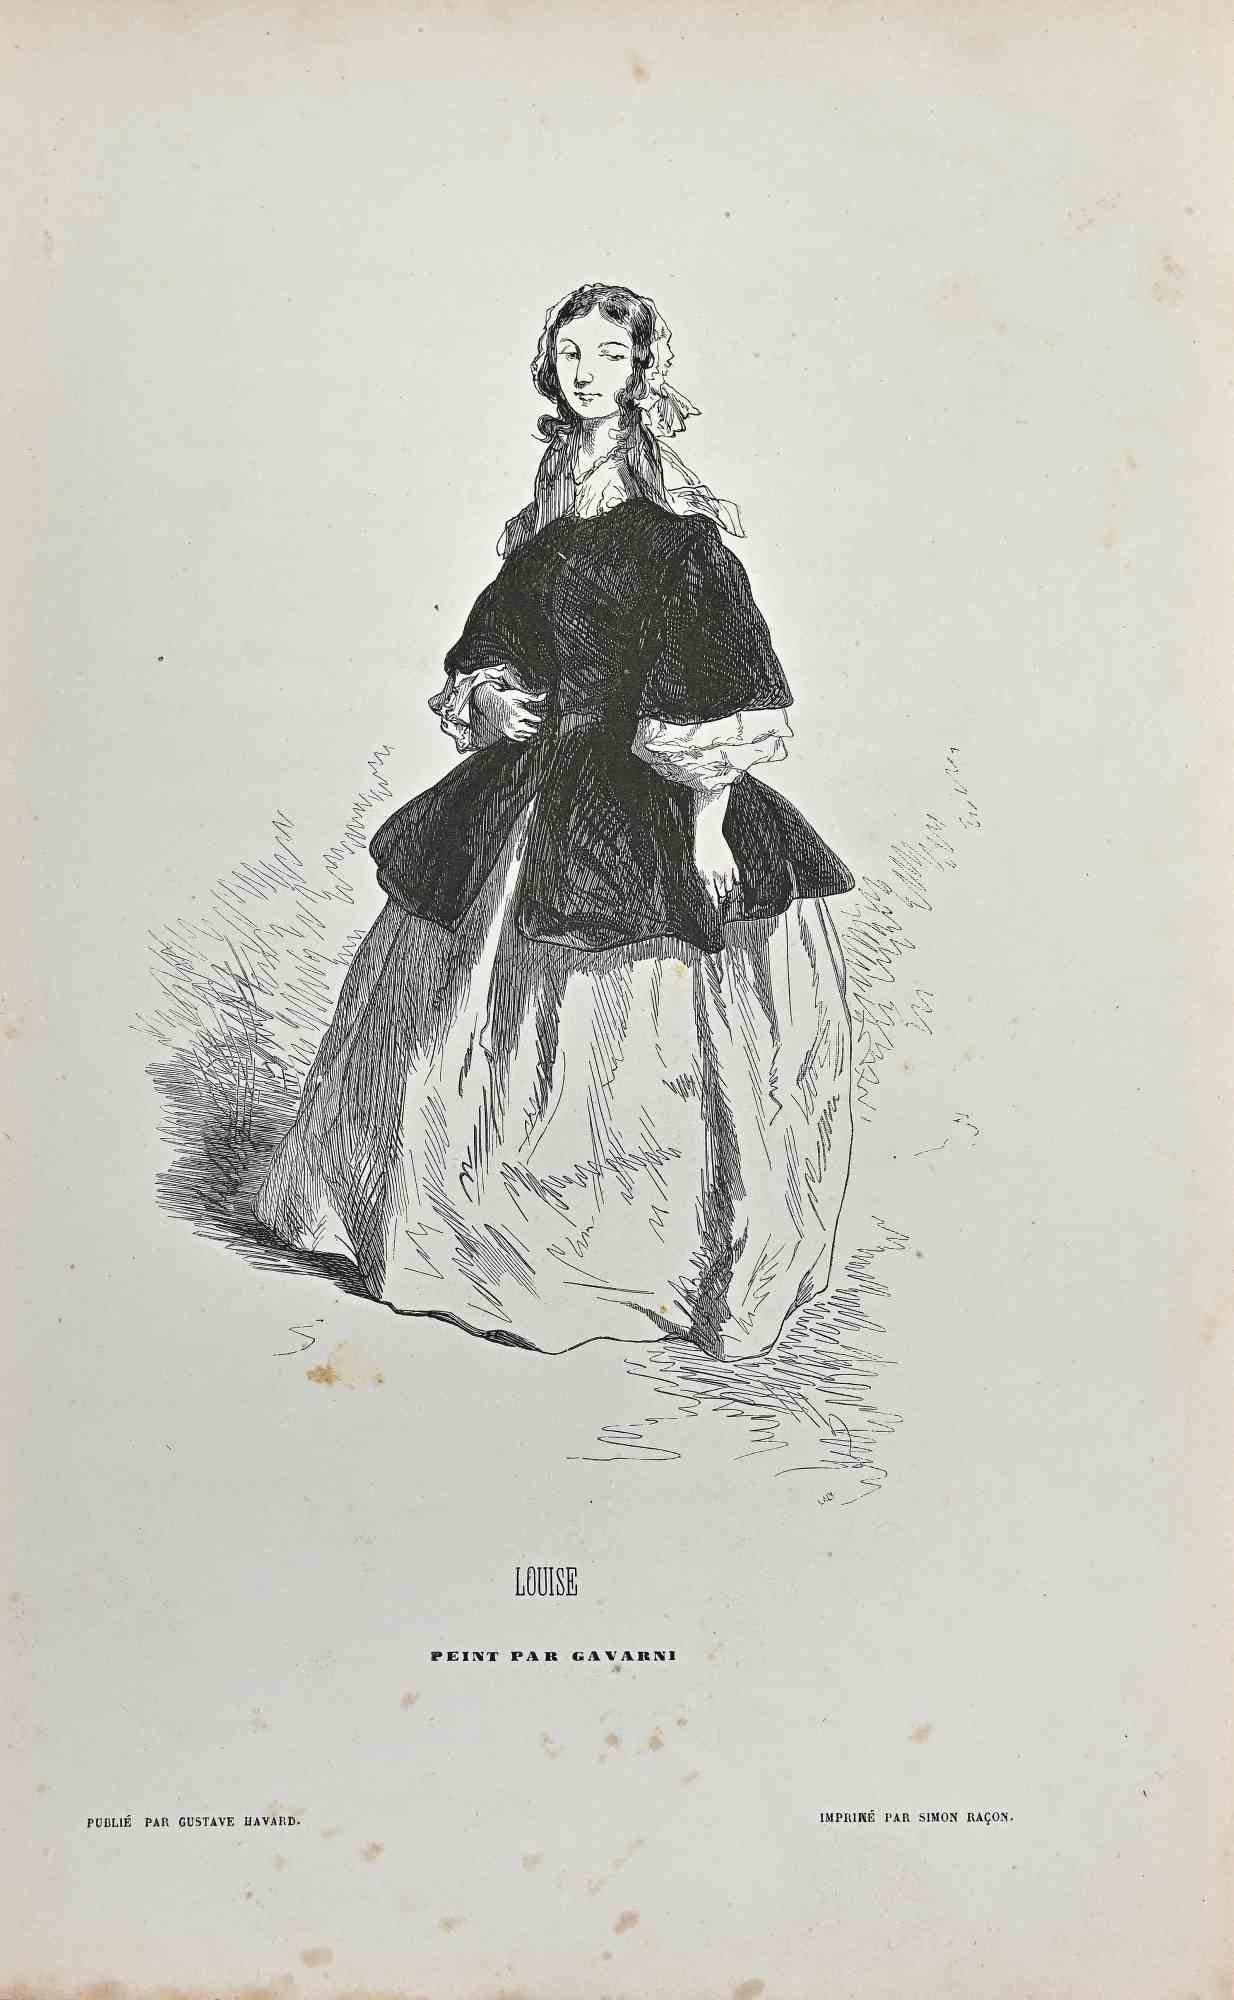 Louise is a lithograph on ivory-colored paper, realized by the French draftsman Paul Gavarni (alias Guillaume Sulpice Chevalier Gavarni, 1804-1866) in the mid-19th Century.

Signed on the plate" Par Gavarni".

From series of "Masques et Visages".